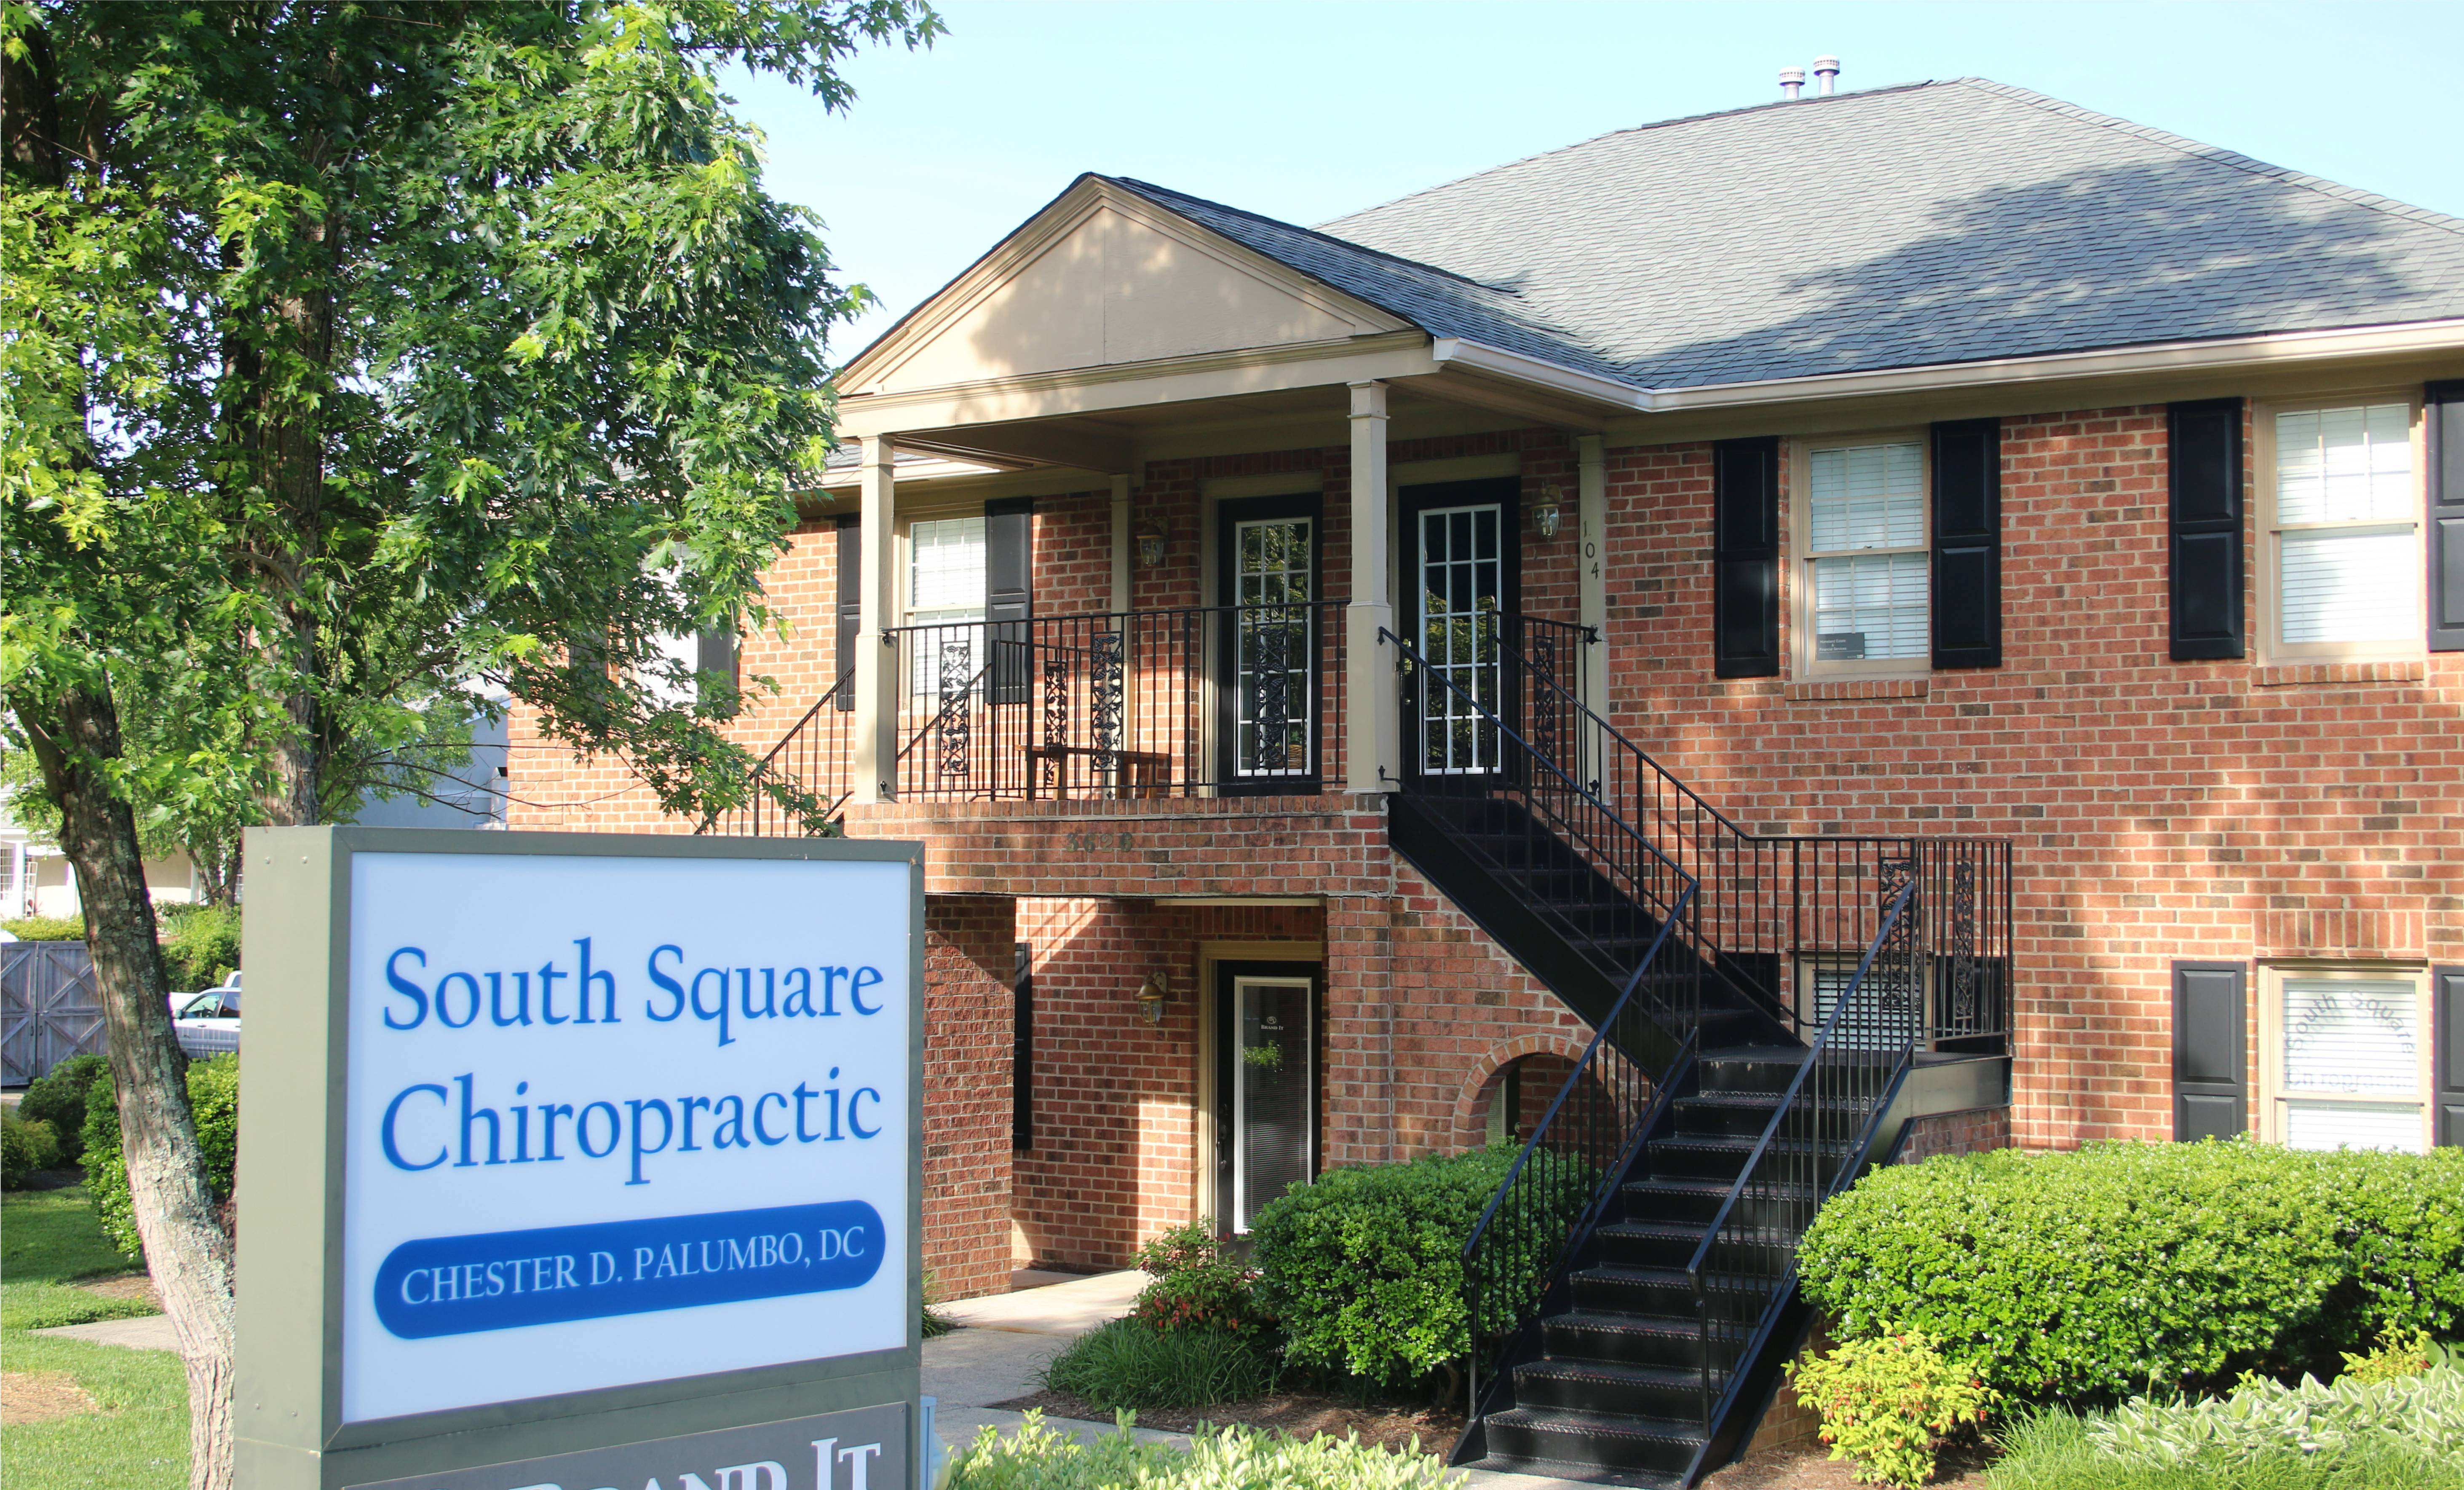 South Square Chiropractic from Shannon Road